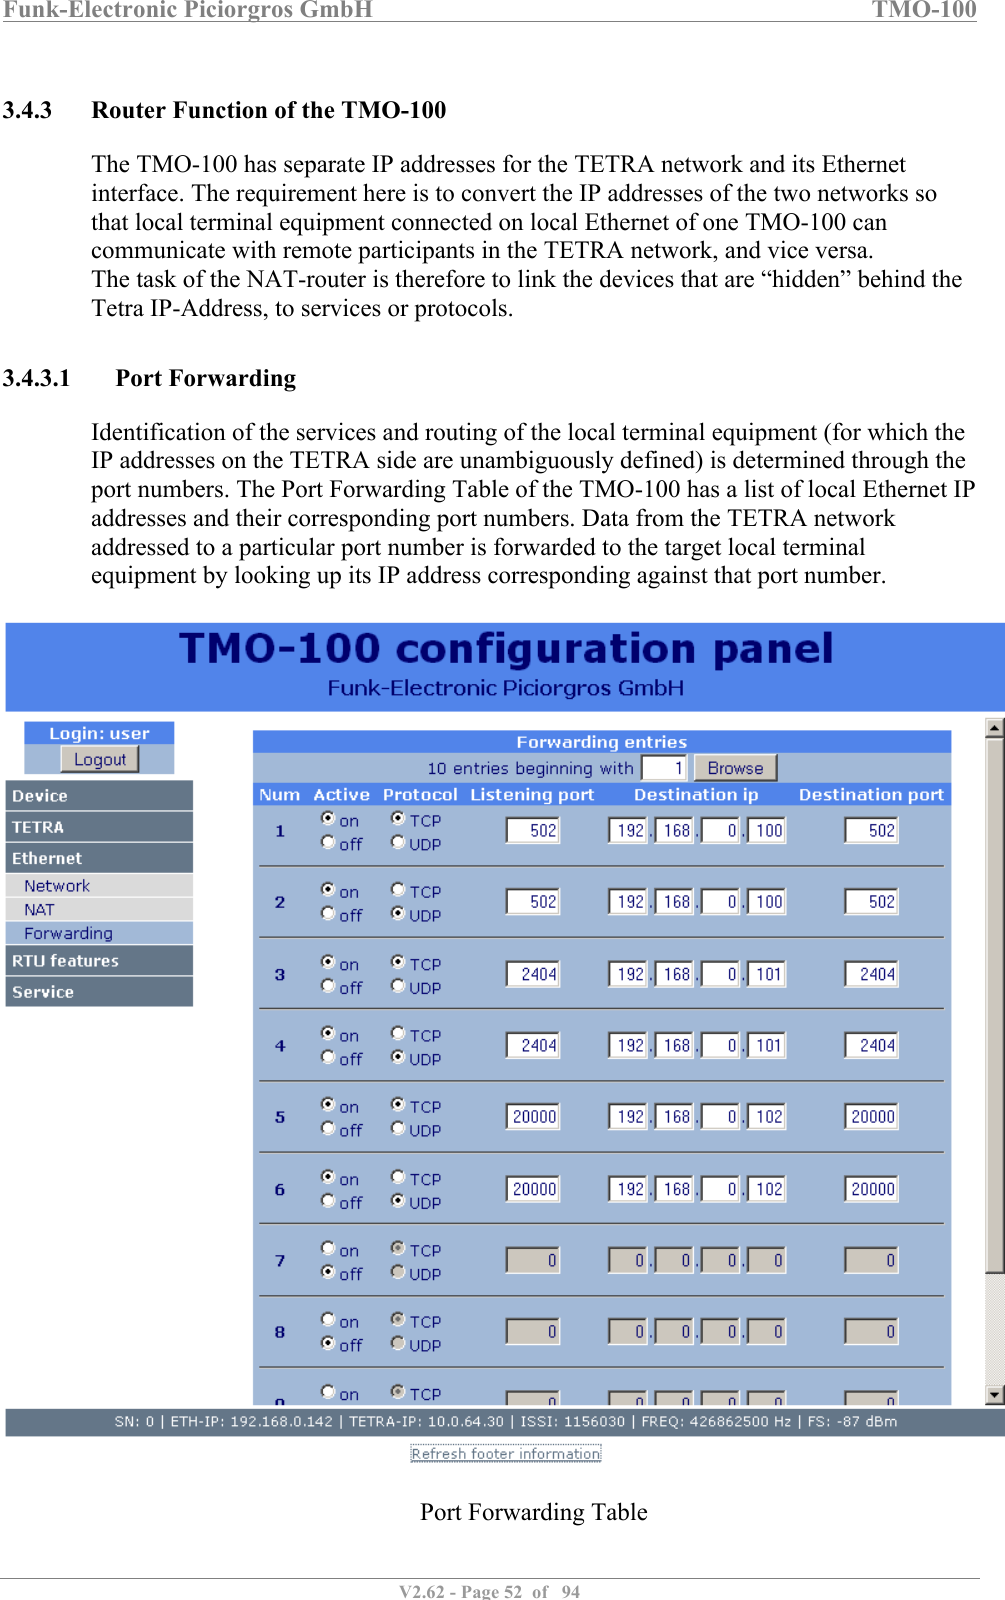 Funk-Electronic Piciorgros GmbH   TMO-100   V2.62 - Page 52  of   94   3.4.3 Router Function of the TMO-100 The TMO-100 has separate IP addresses for the TETRA network and its Ethernet interface. The requirement here is to convert the IP addresses of the two networks so that local terminal equipment connected on local Ethernet of one TMO-100 can communicate with remote participants in the TETRA network, and vice versa.  The task of the NAT-router is therefore to link the devices that are “hidden” behind the Tetra IP-Address, to services or protocols.  3.4.3.1 Port Forwarding Identification of the services and routing of the local terminal equipment (for which the IP addresses on the TETRA side are unambiguously defined) is determined through the port numbers. The Port Forwarding Table of the TMO-100 has a list of local Ethernet IP addresses and their corresponding port numbers. Data from the TETRA network addressed to a particular port number is forwarded to the target local terminal equipment by looking up its IP address corresponding against that port number.    Port Forwarding Table 